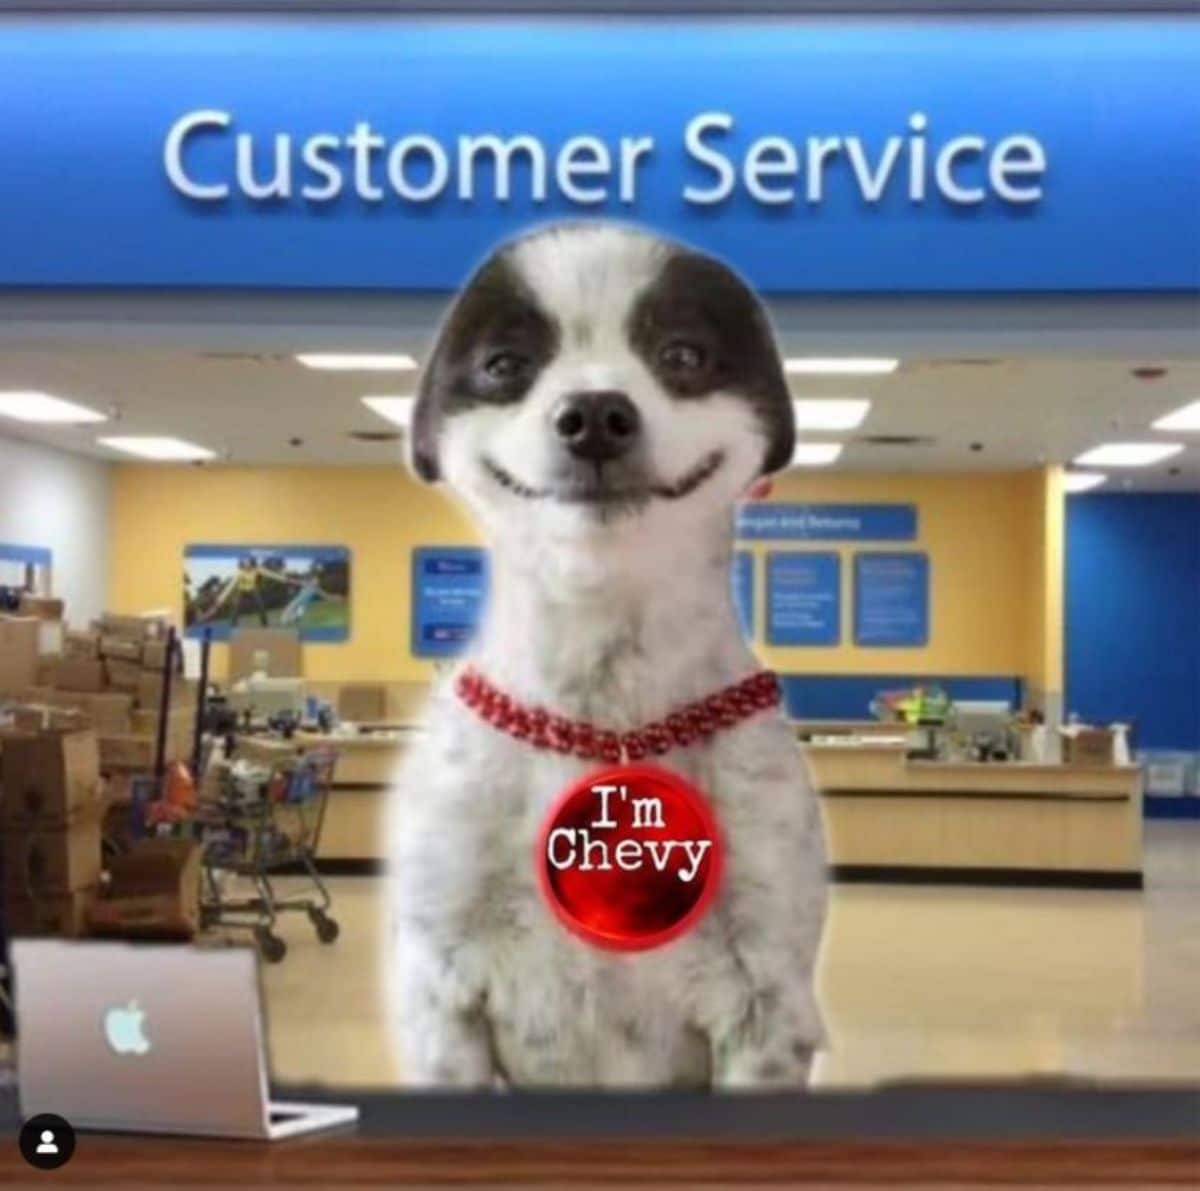 black and white dog who looks like he's smiling photoshopped into a room that has a large customer service sign and standing behind a counter next to a macbook